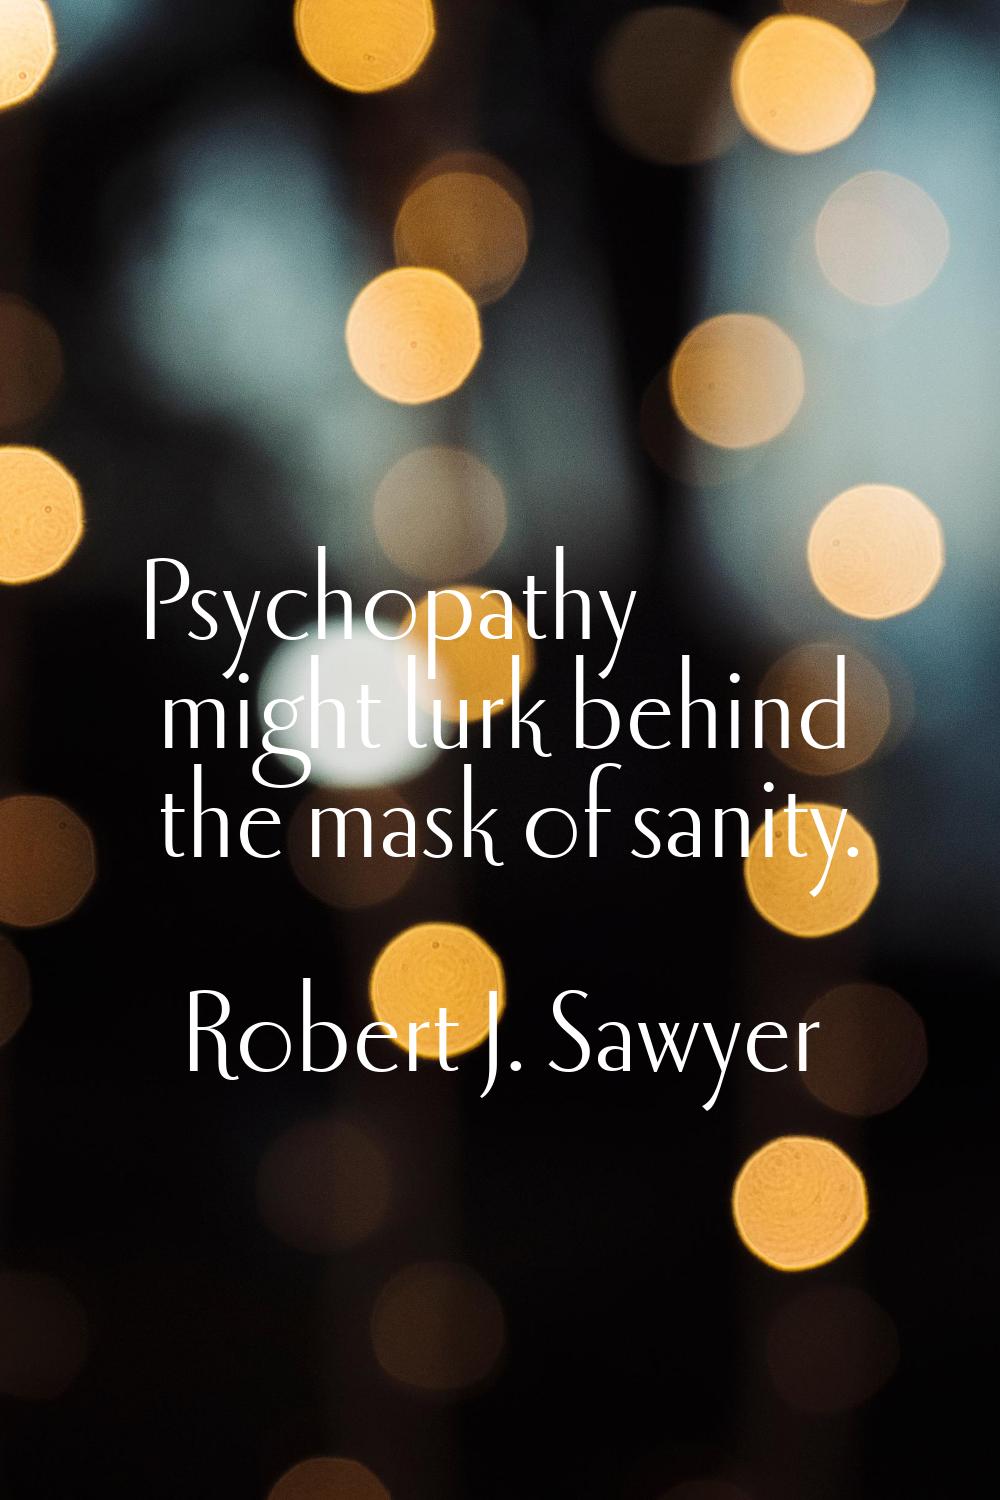 Psychopathy might lurk behind the mask of sanity.